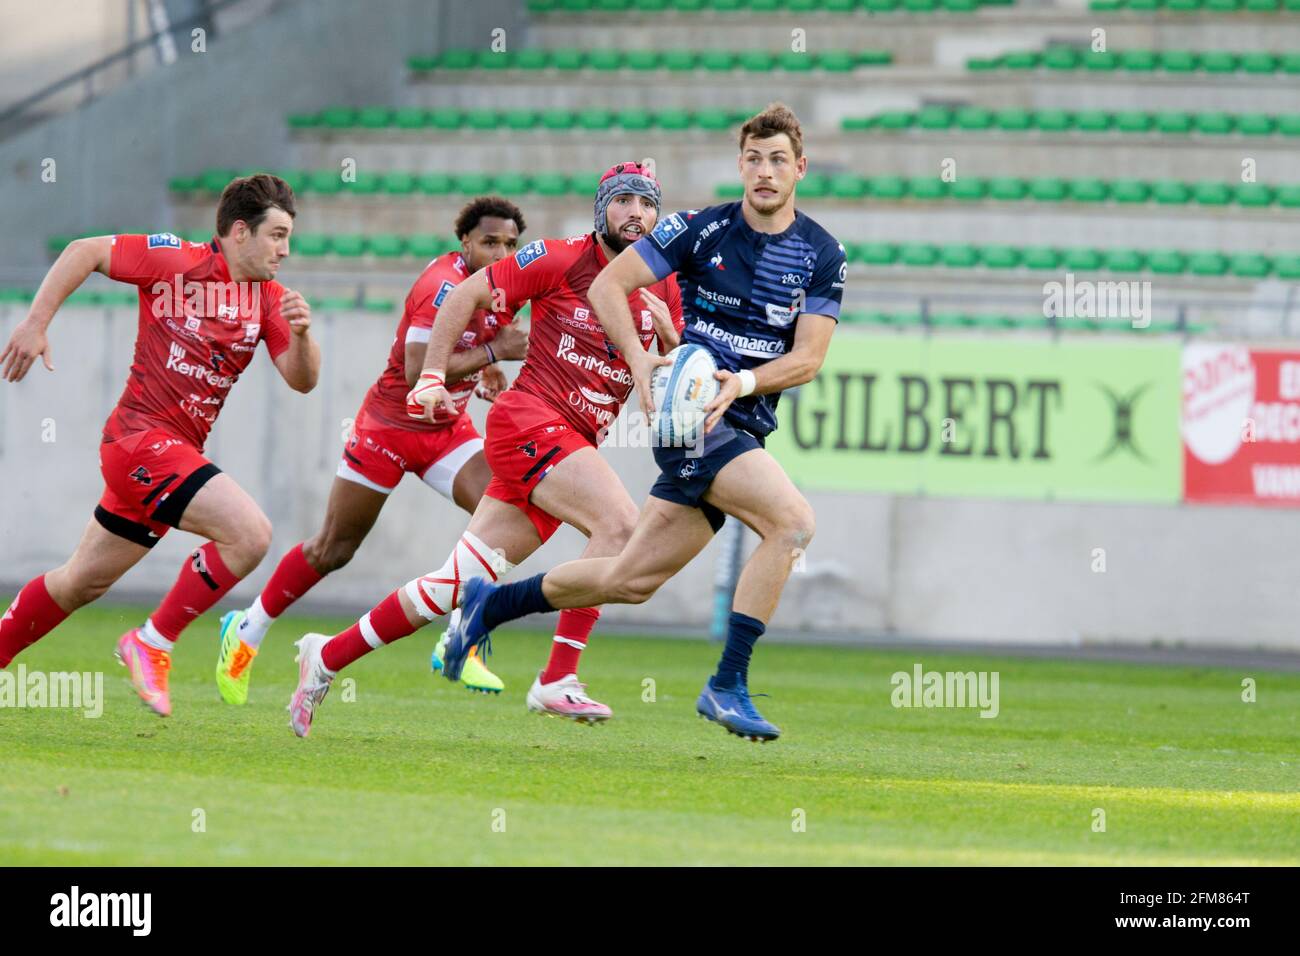 Maelan Rabut Of Vannes During The French Championship Pro D2 Rugby Union Match Between Rc Vannes And Oyonnax Rugby On May 6 2021 At La Rabine Stadium In Vannes France Photo